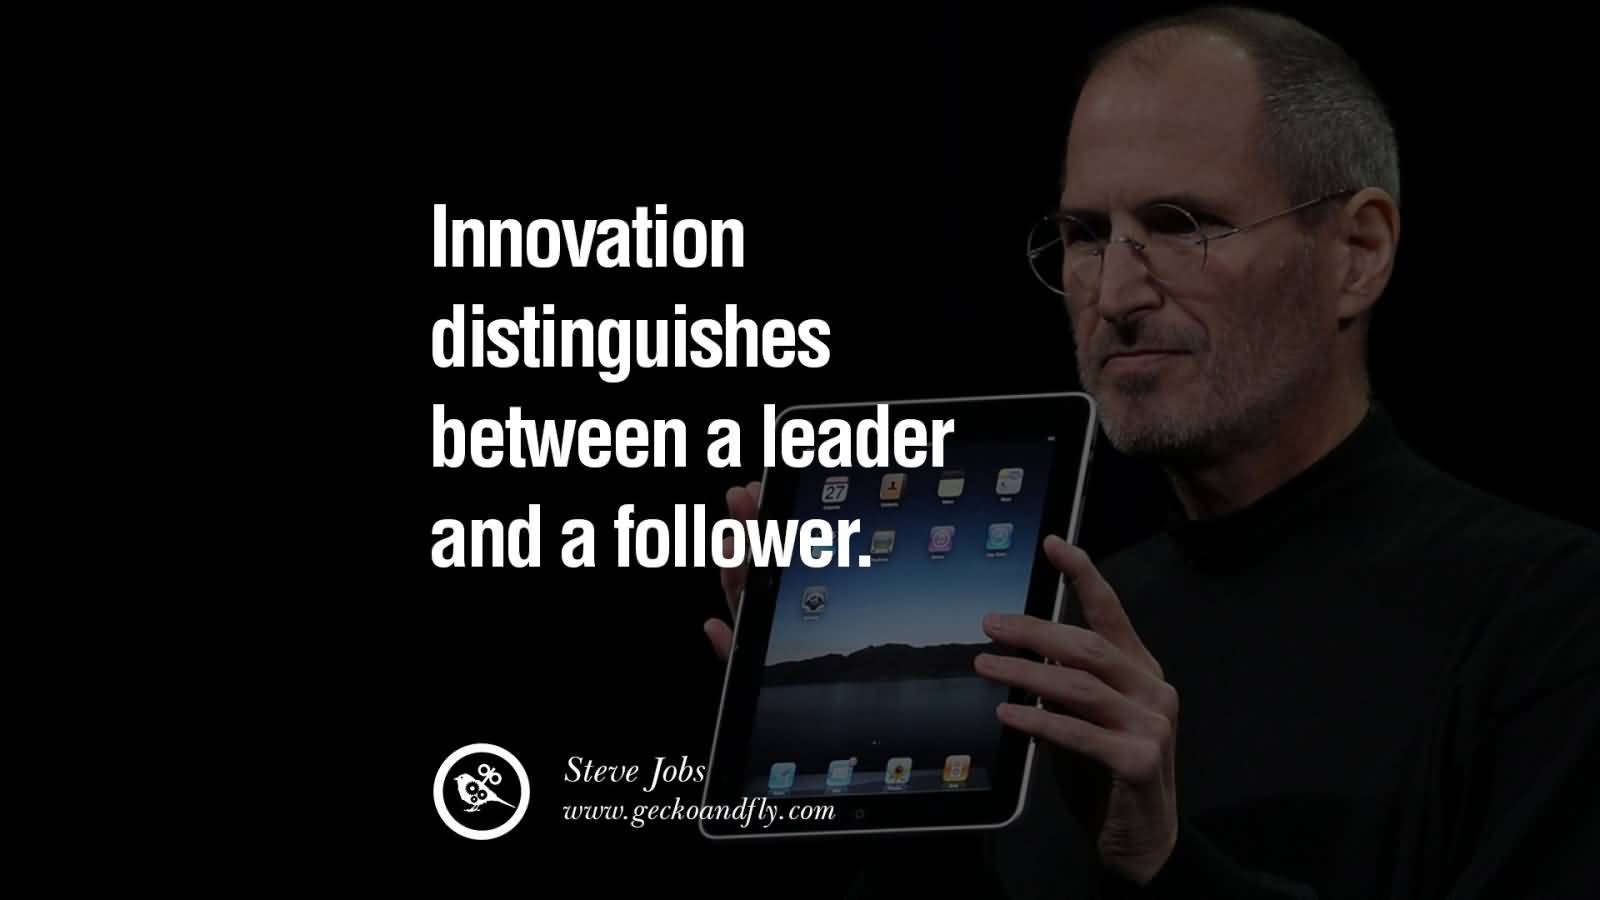 Innovation distinguishes between a leader and a follower. Steve Jobs